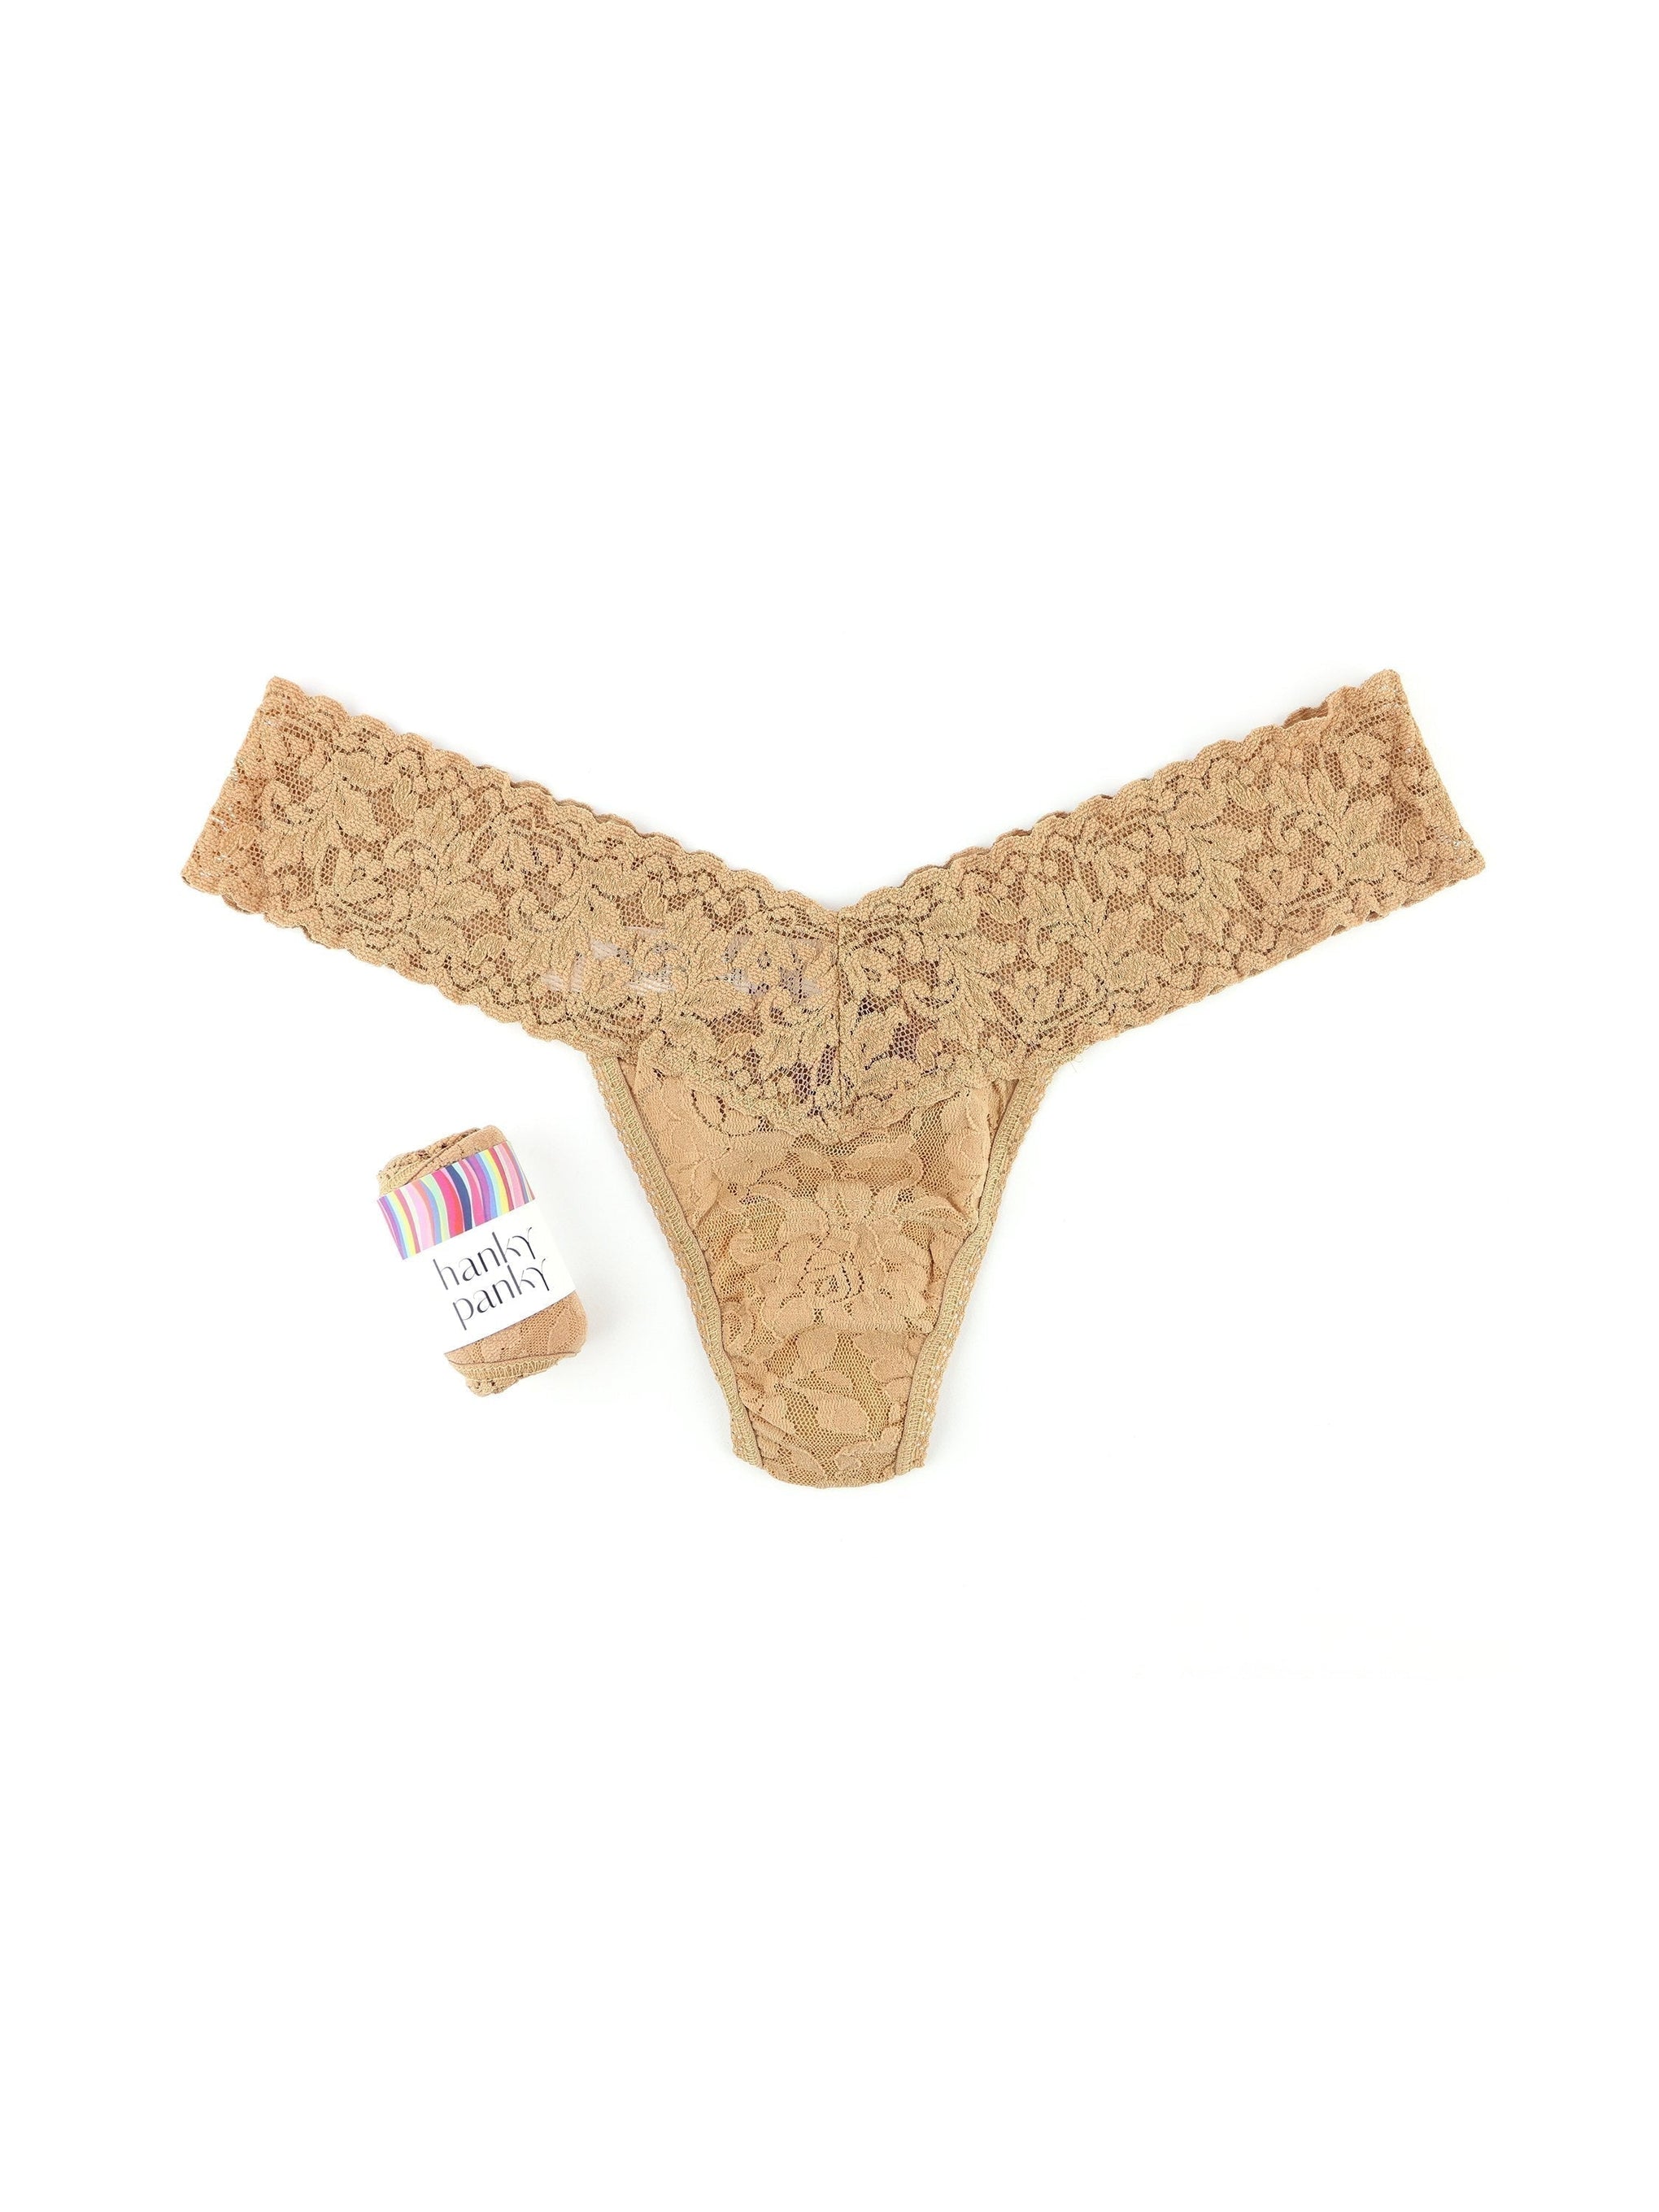  Sunm Boutique Thongs for Women Lace Thongs for Women